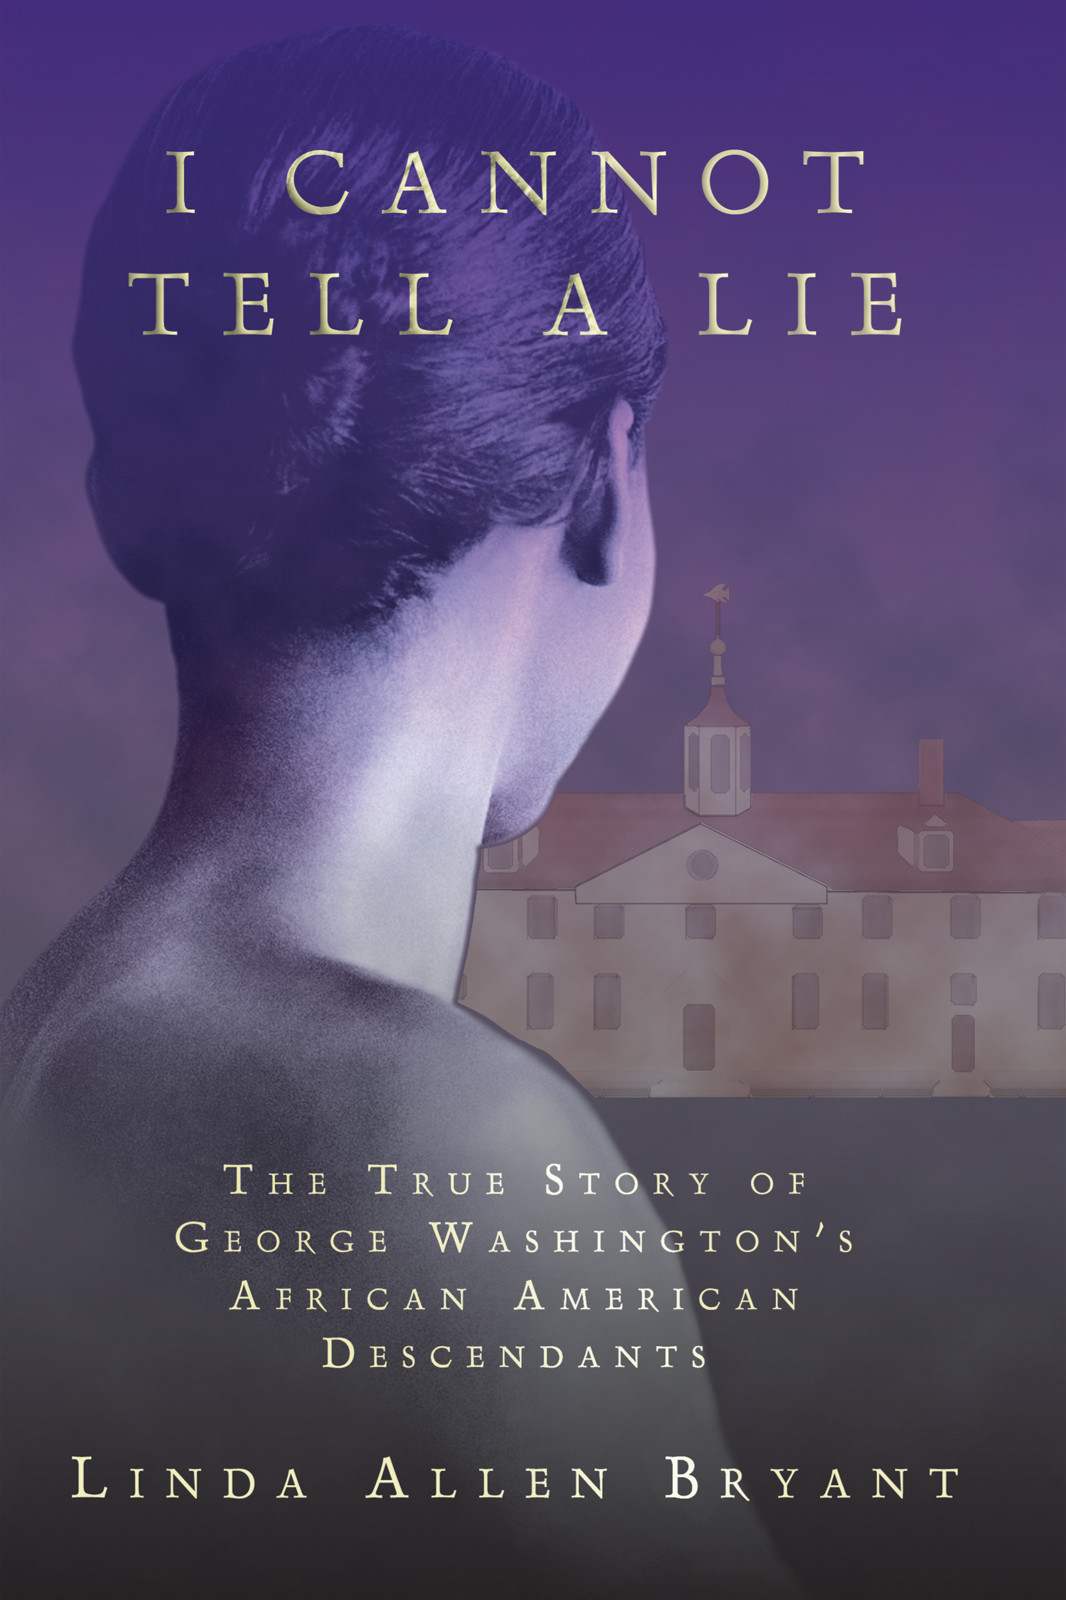 I Cannot Tell a Lie: The True Story of George Washington's African American Descendants